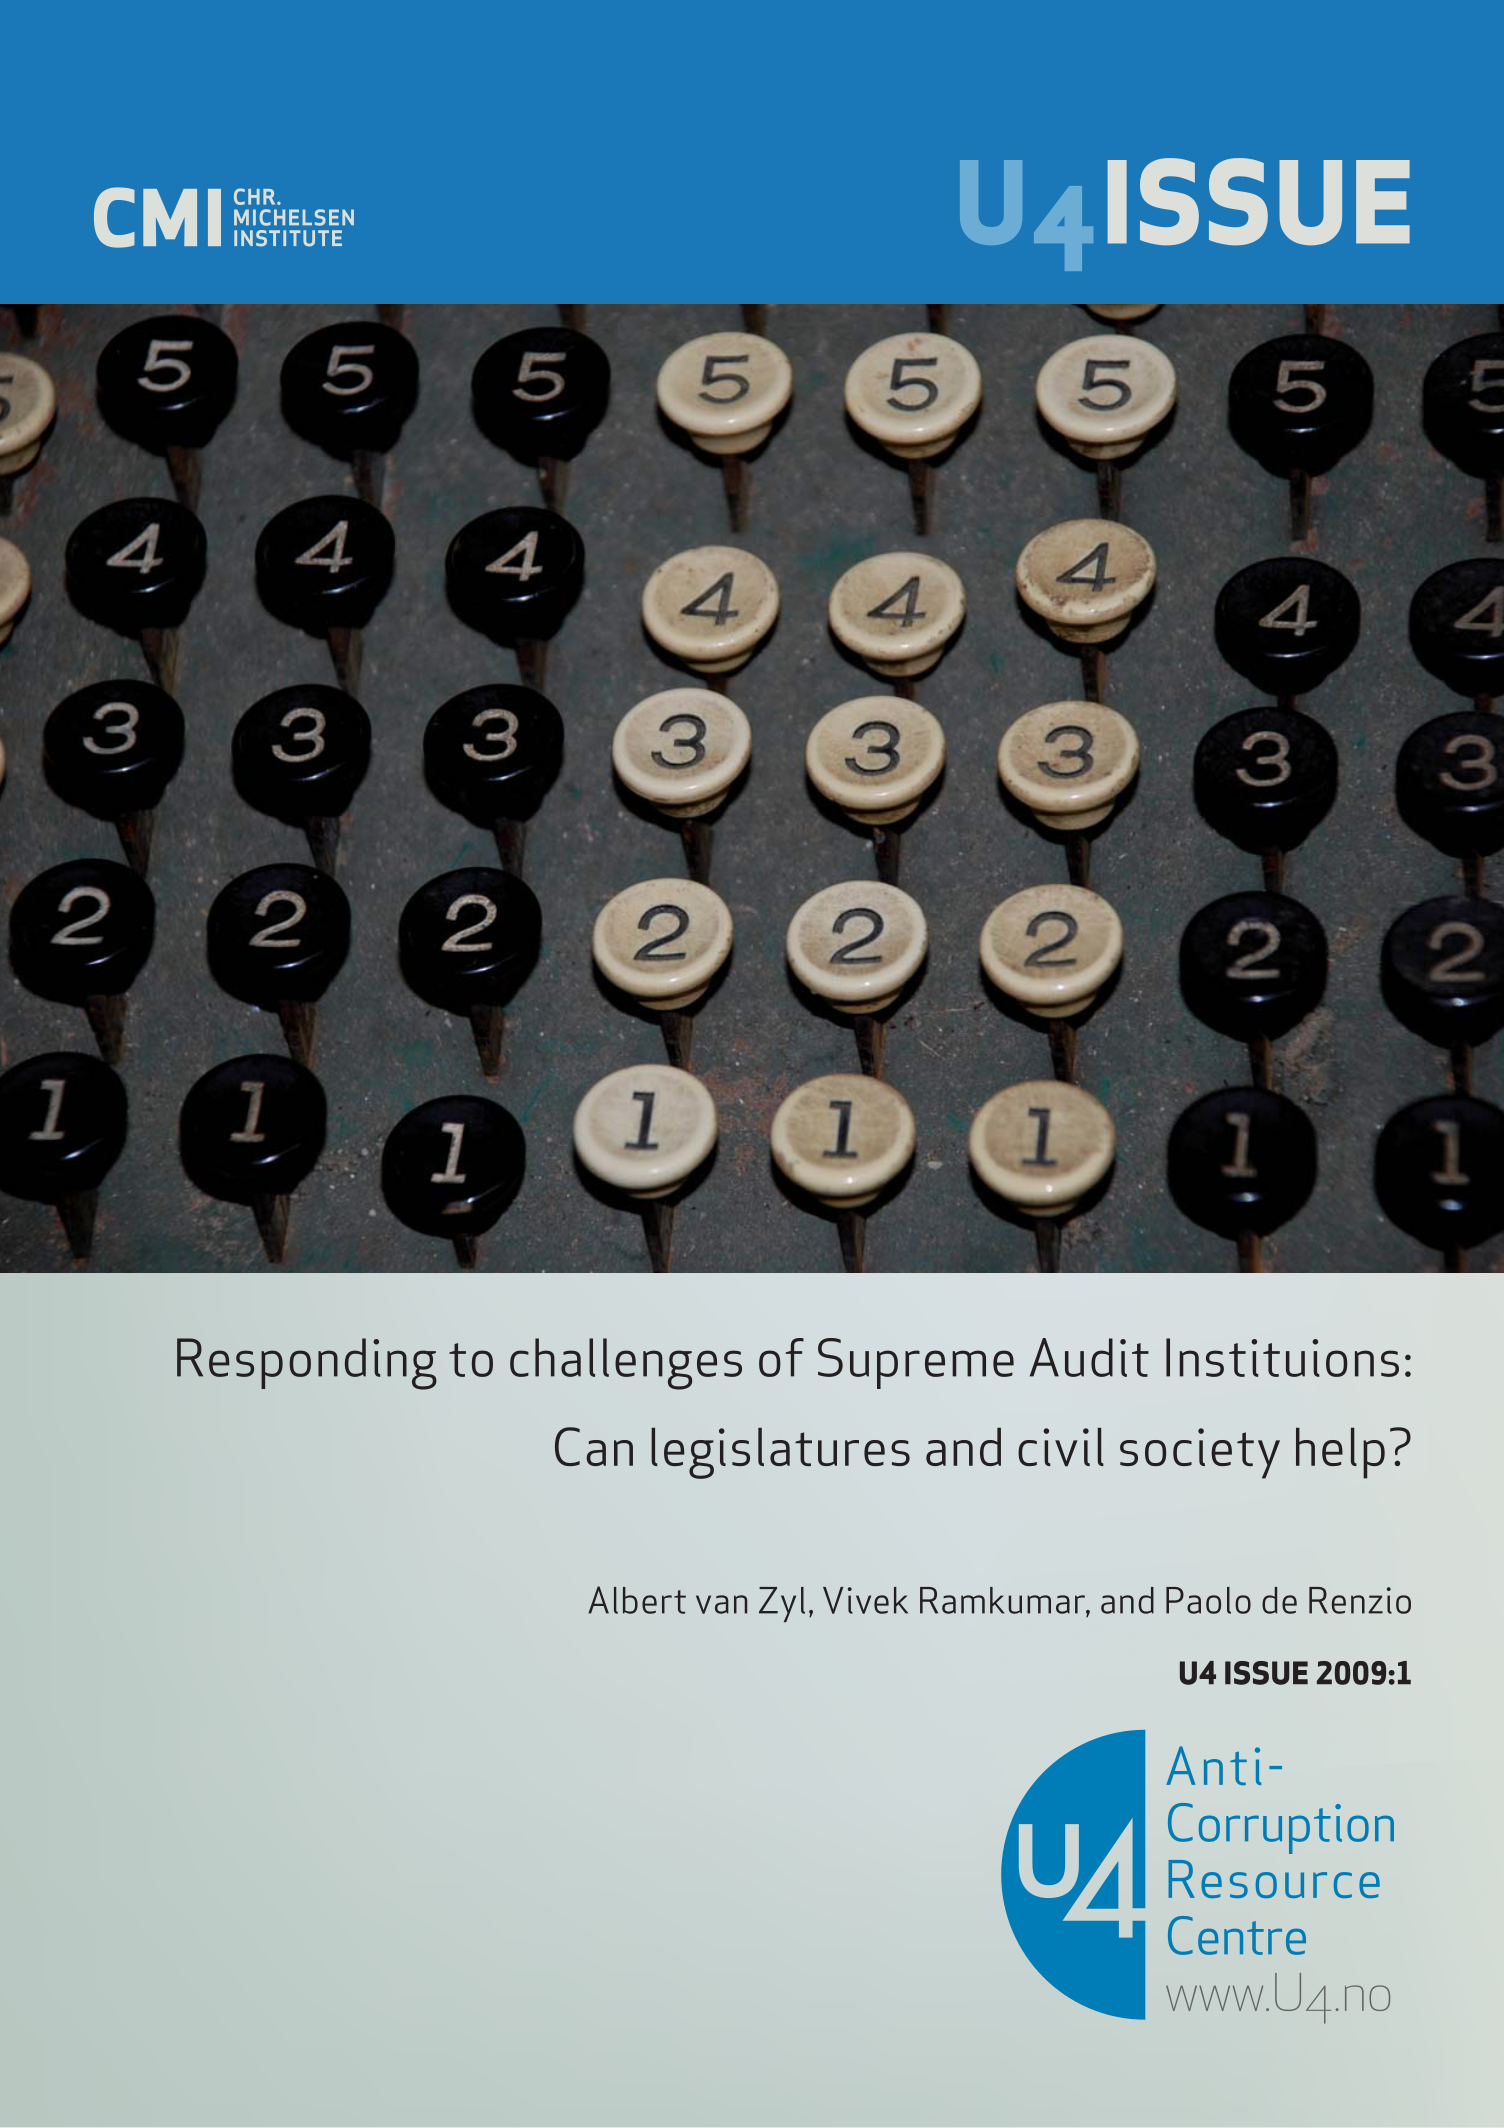 Responding to the challenges of supreme audit institutions: Can legislatures and civil society help?